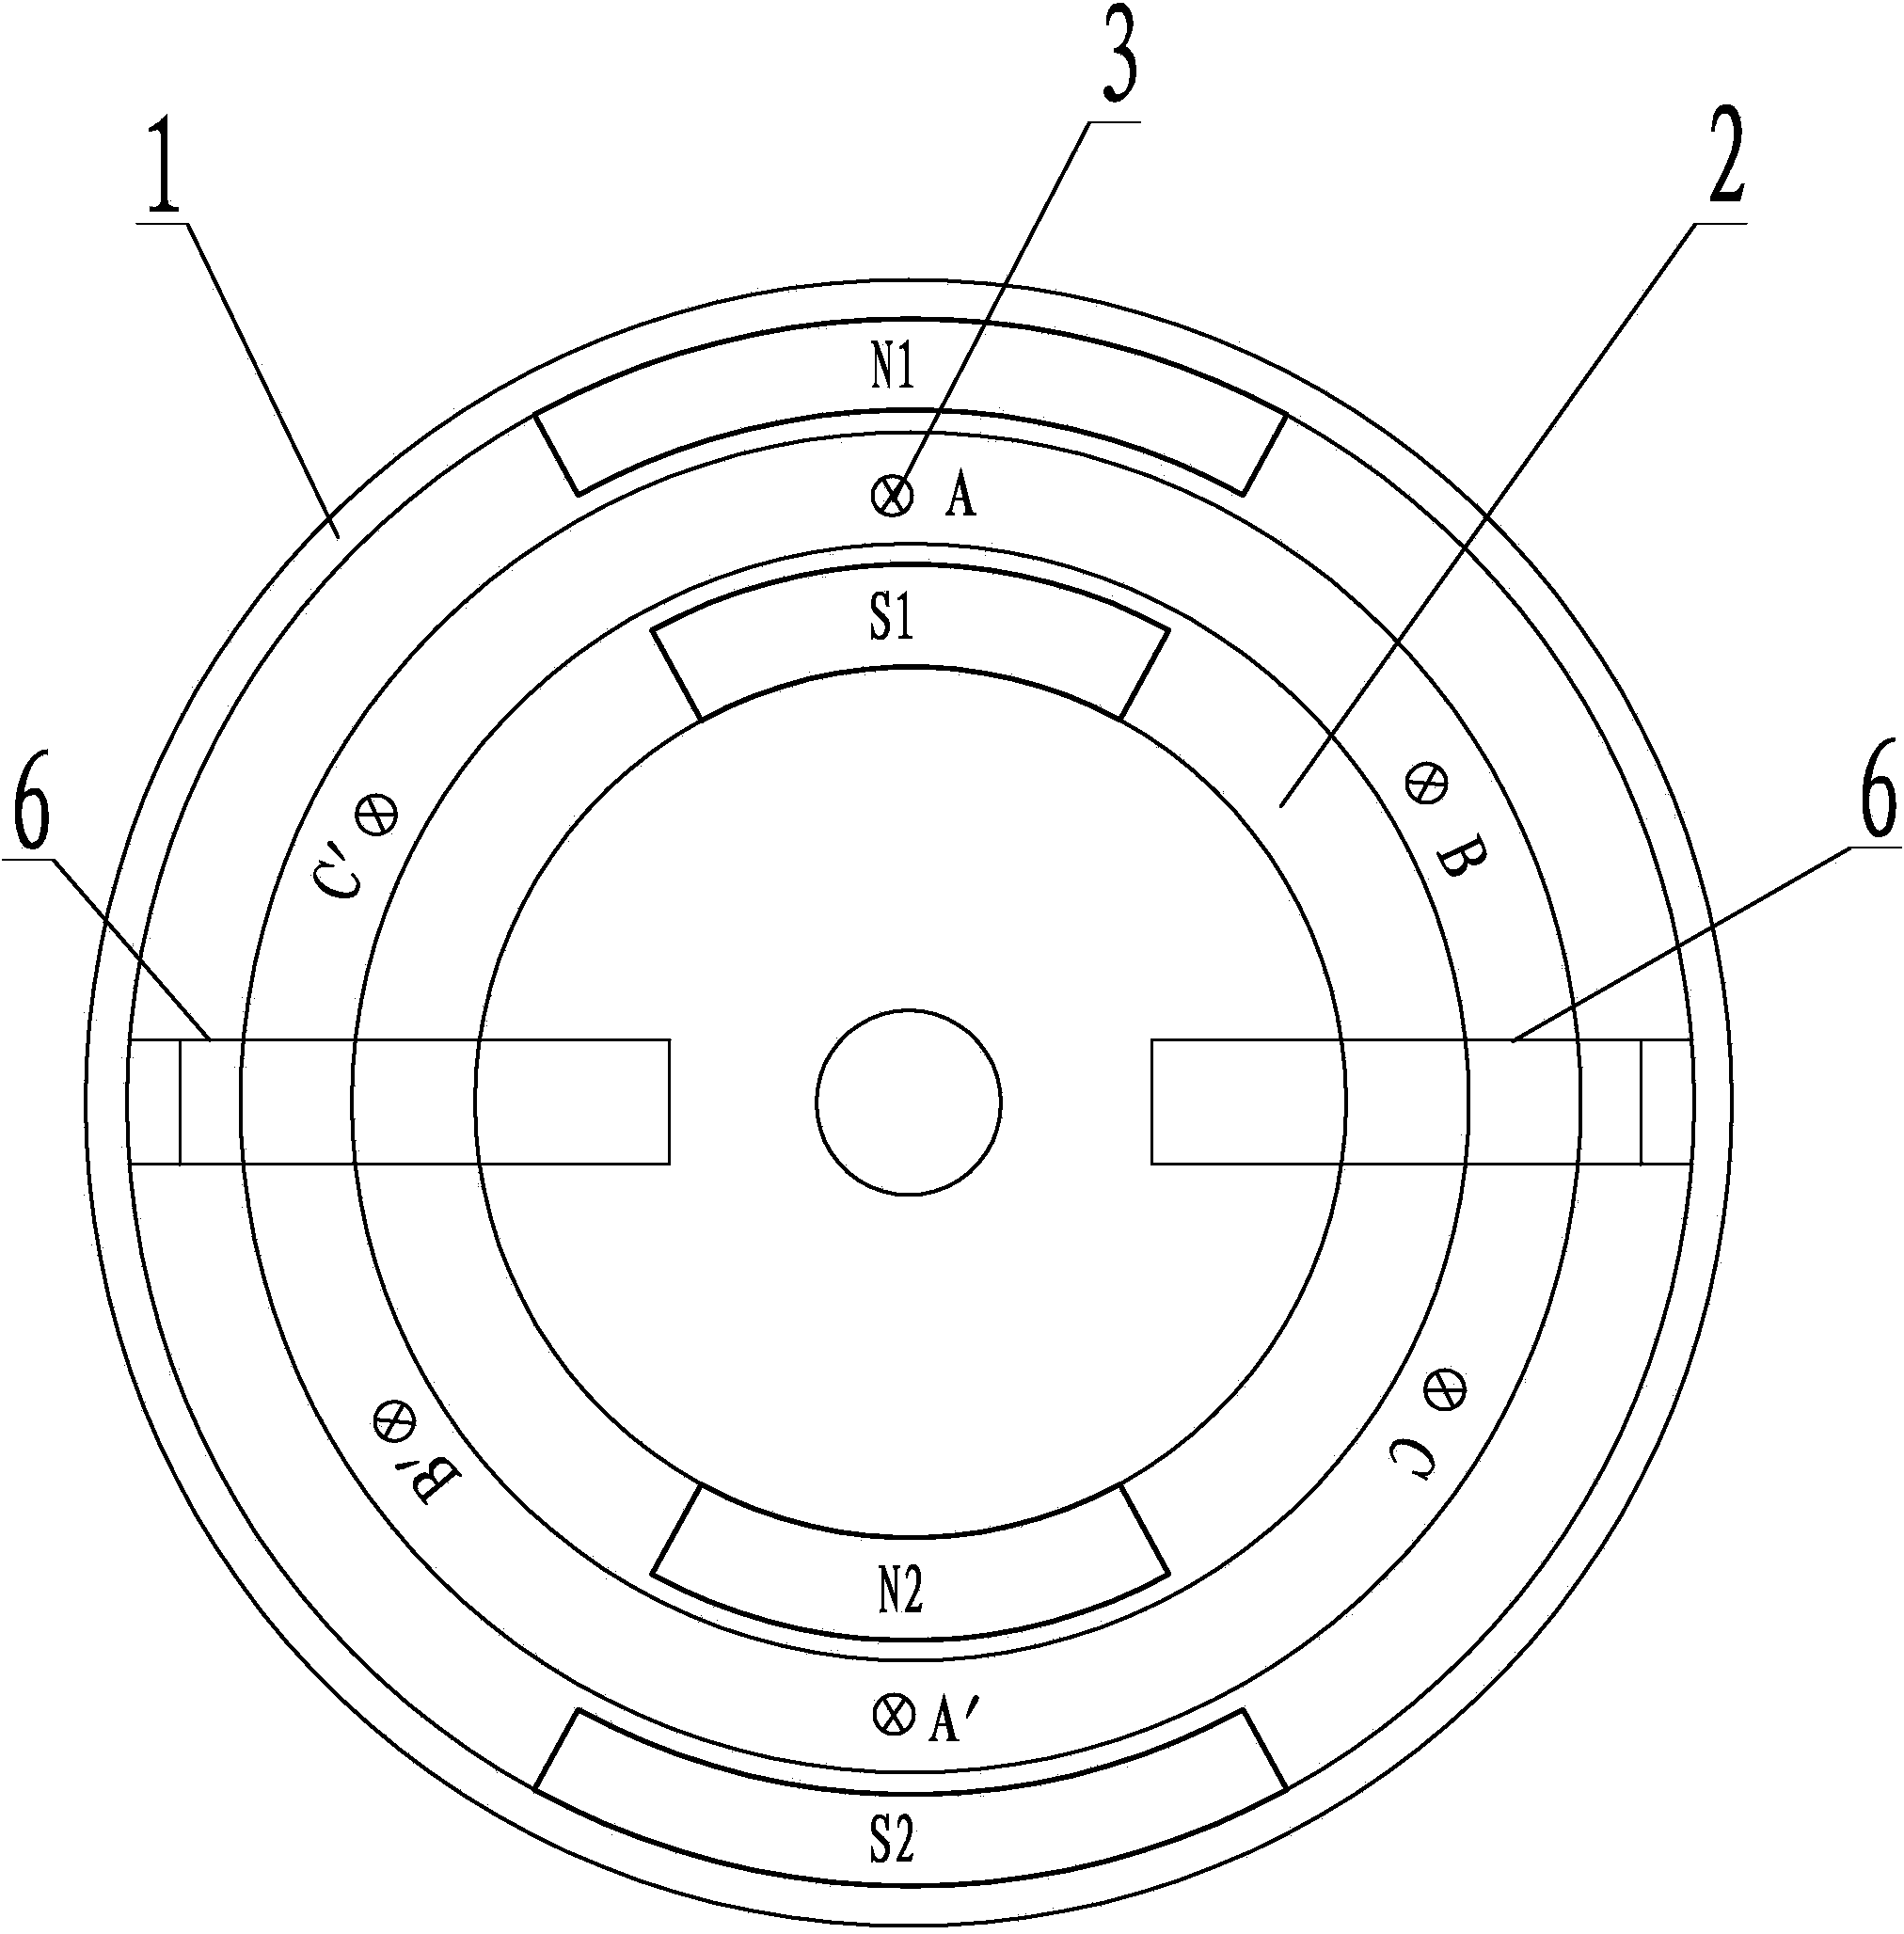 No-magnetic-resistance type direct current generator